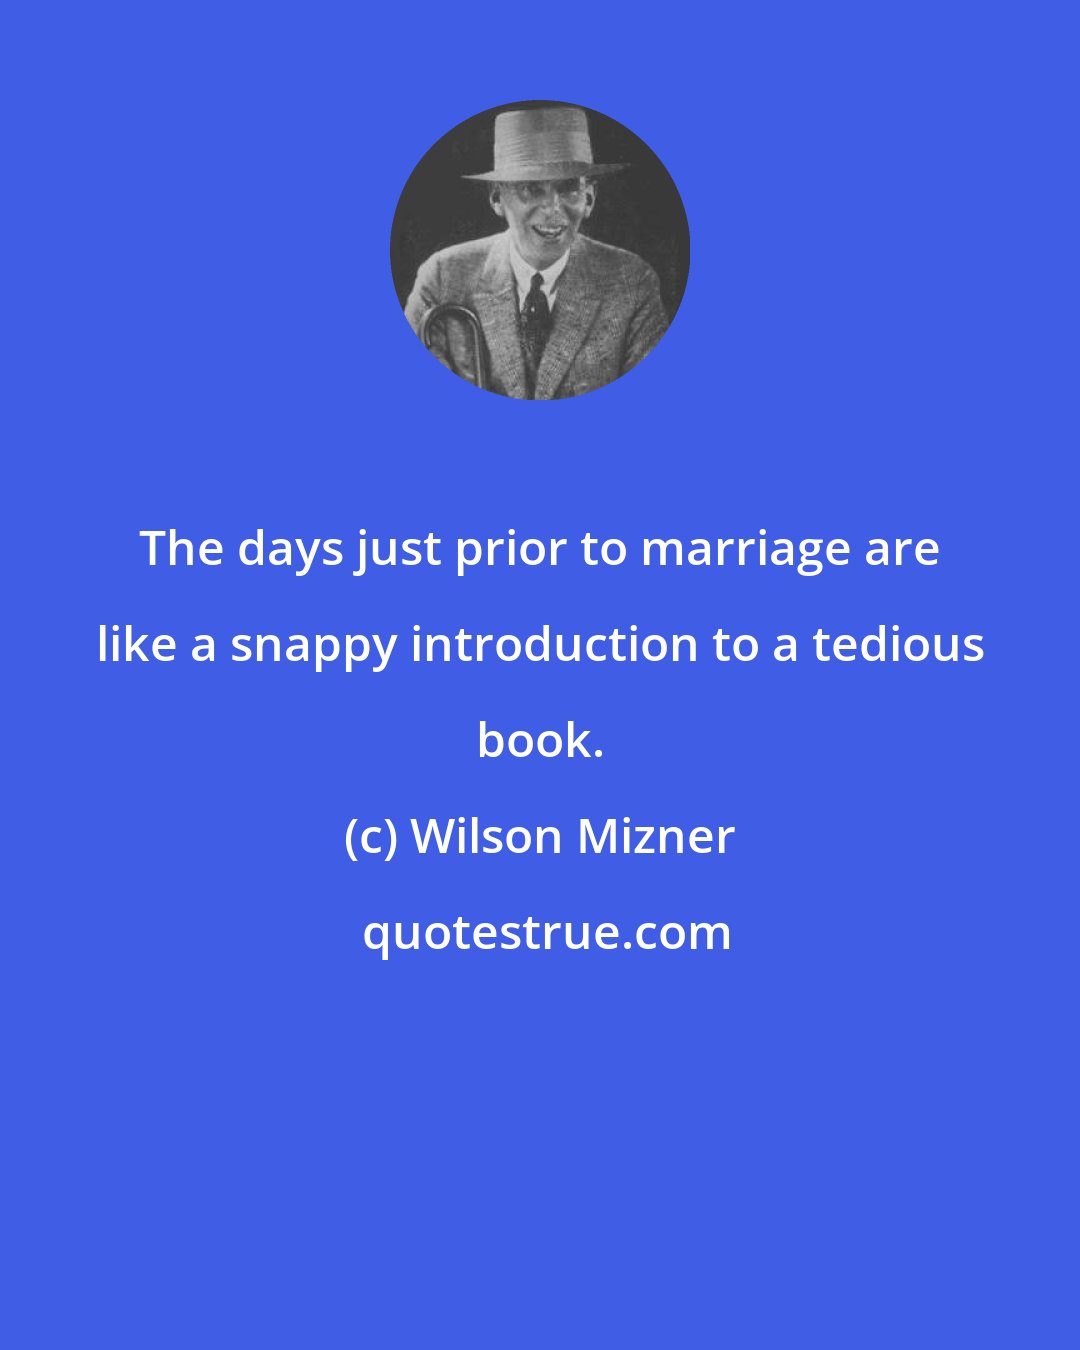 Wilson Mizner: The days just prior to marriage are like a snappy introduction to a tedious book.